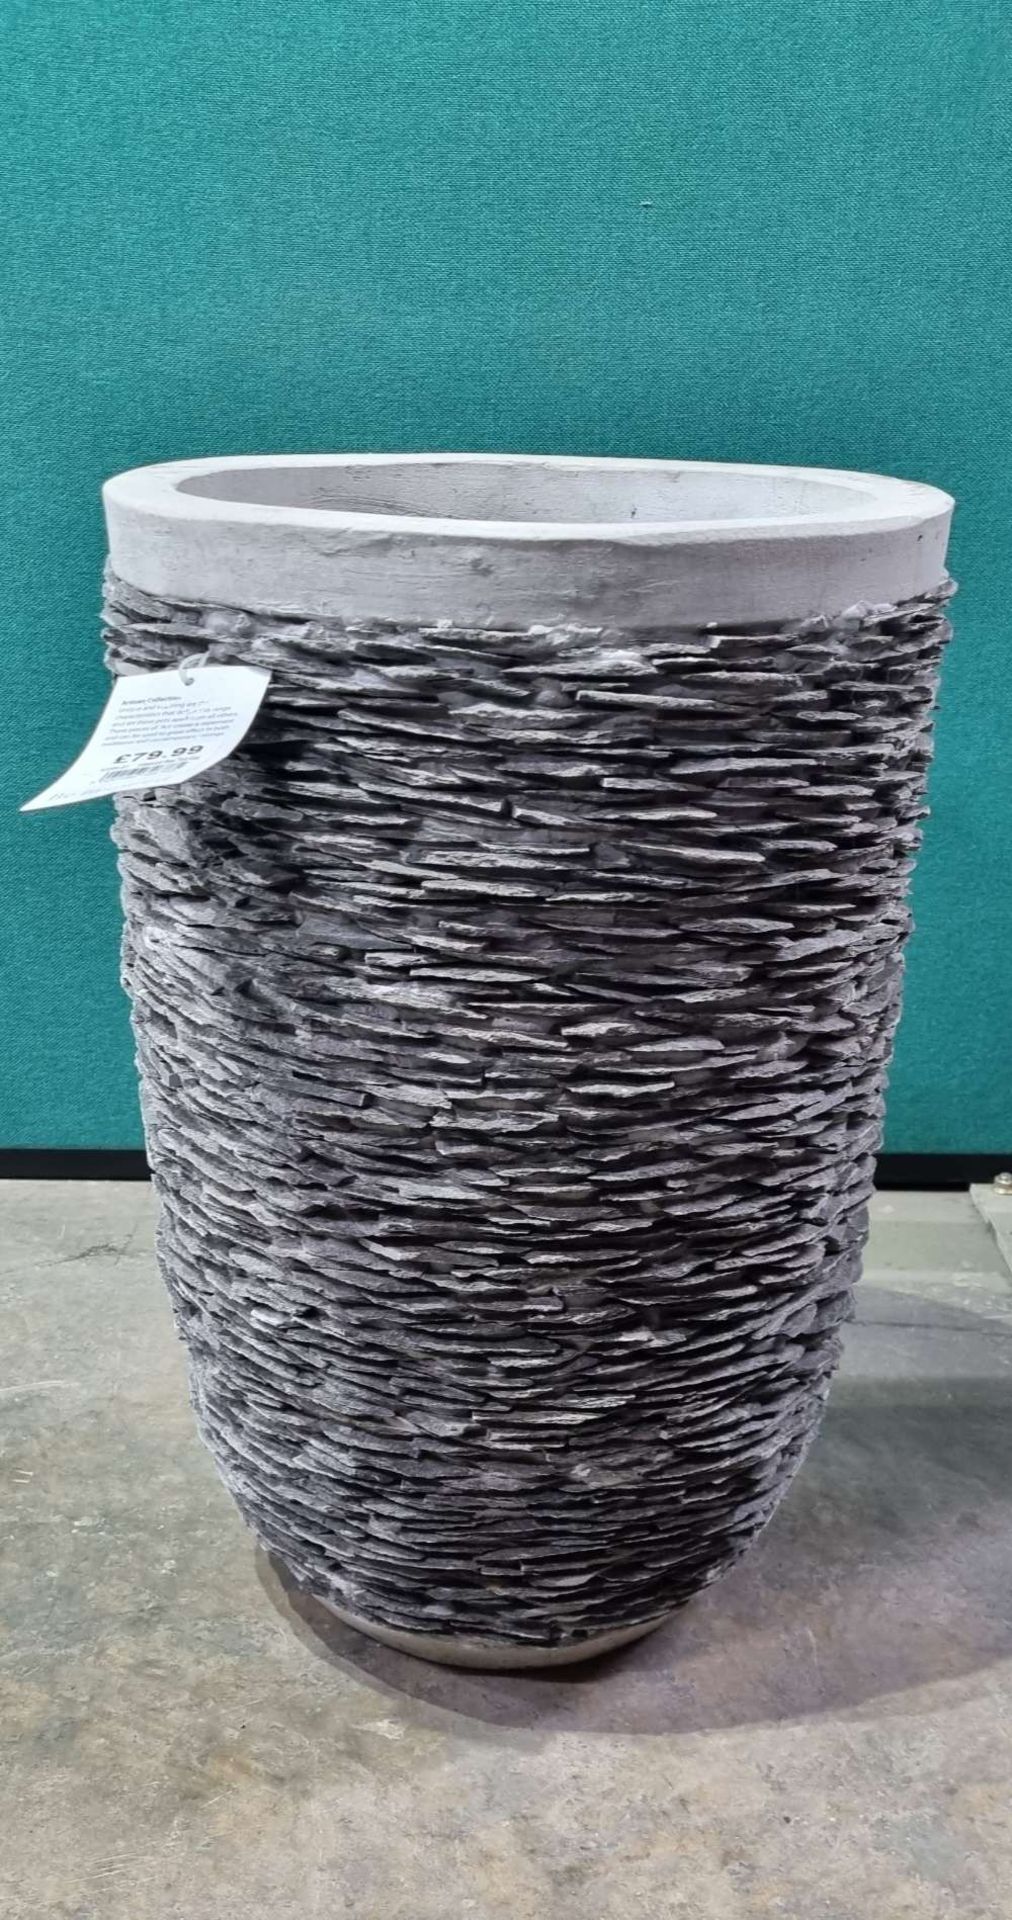 Mims Artisan Collection Westcott BEA 40294-S1 Tall Slate Egg Planter | 550mm x 350mm | RRP £79.99 - Image 3 of 5